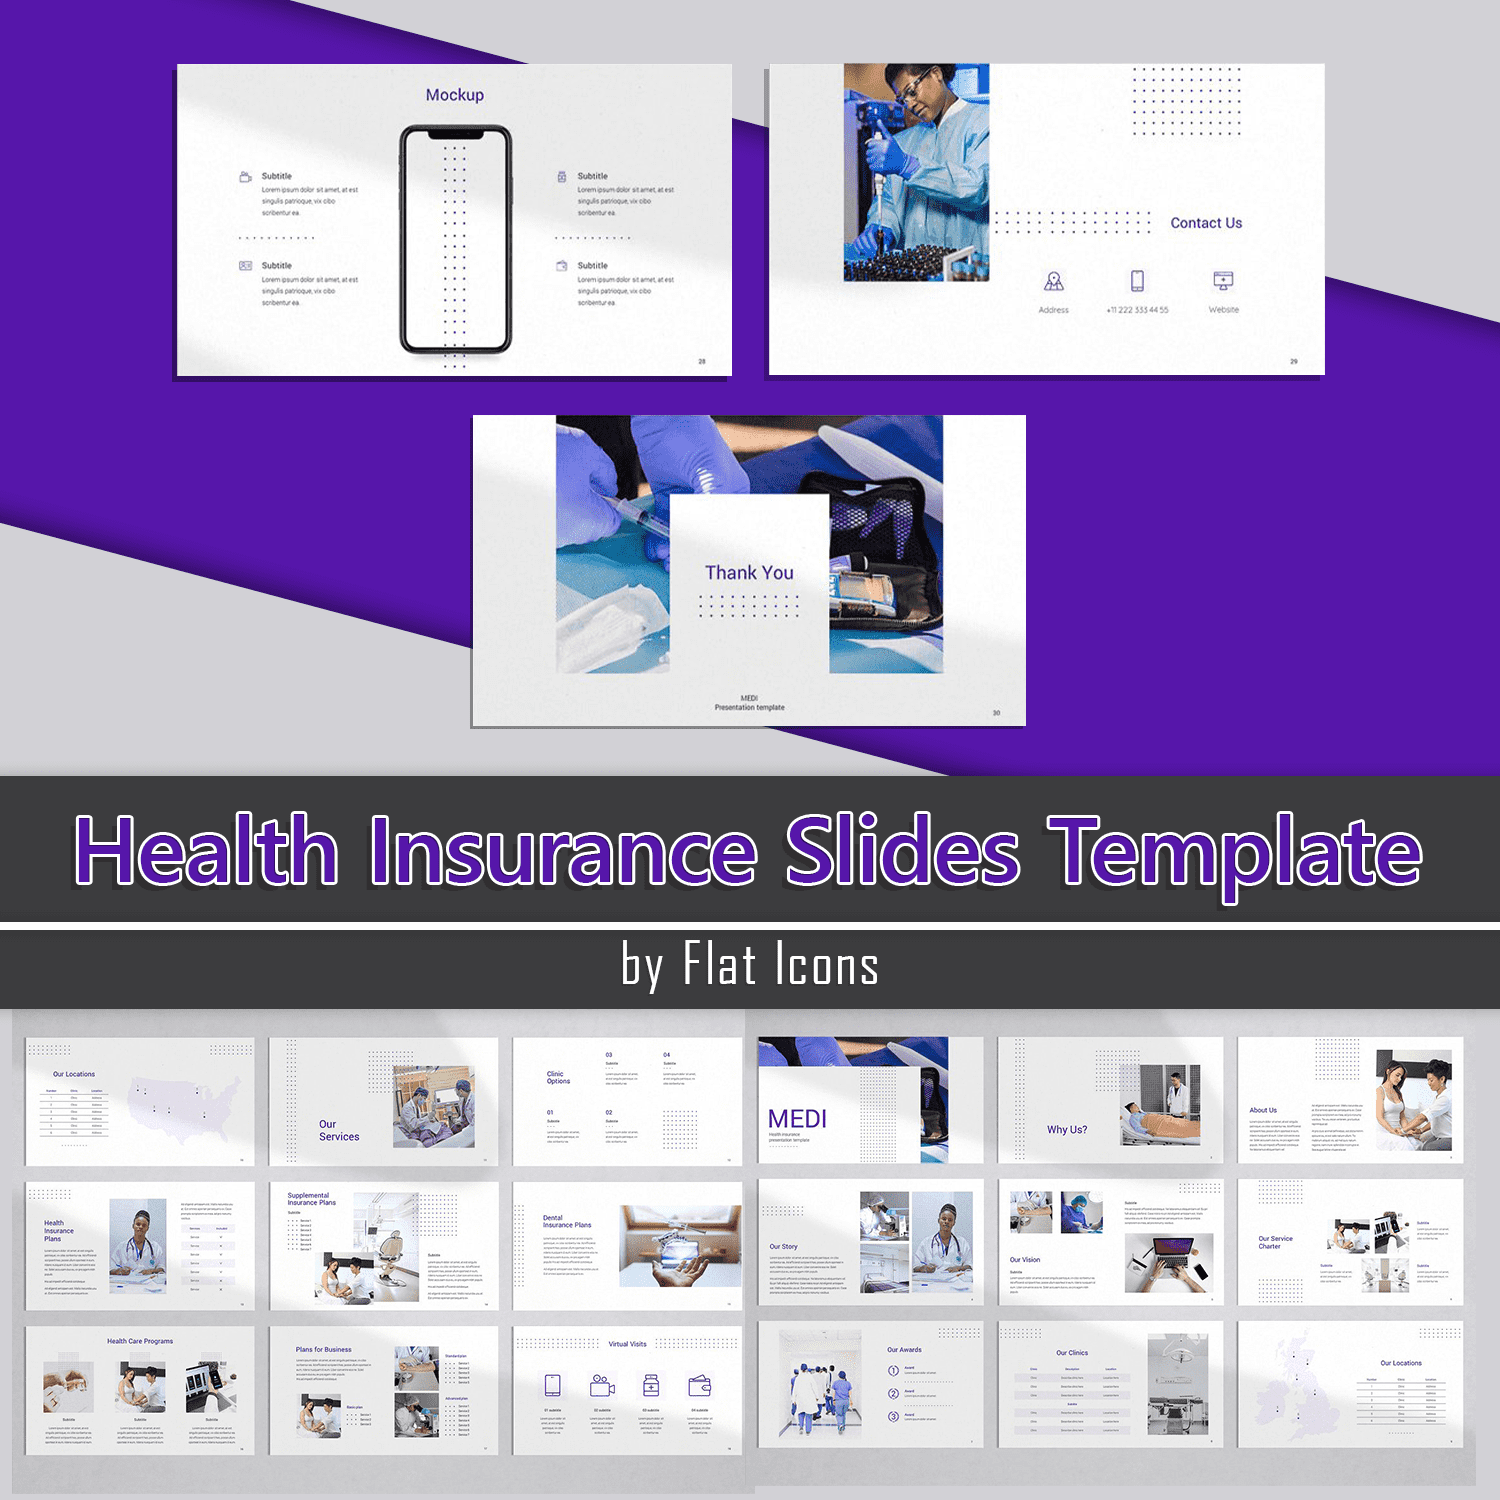 Health Insurance Slides Template cover.